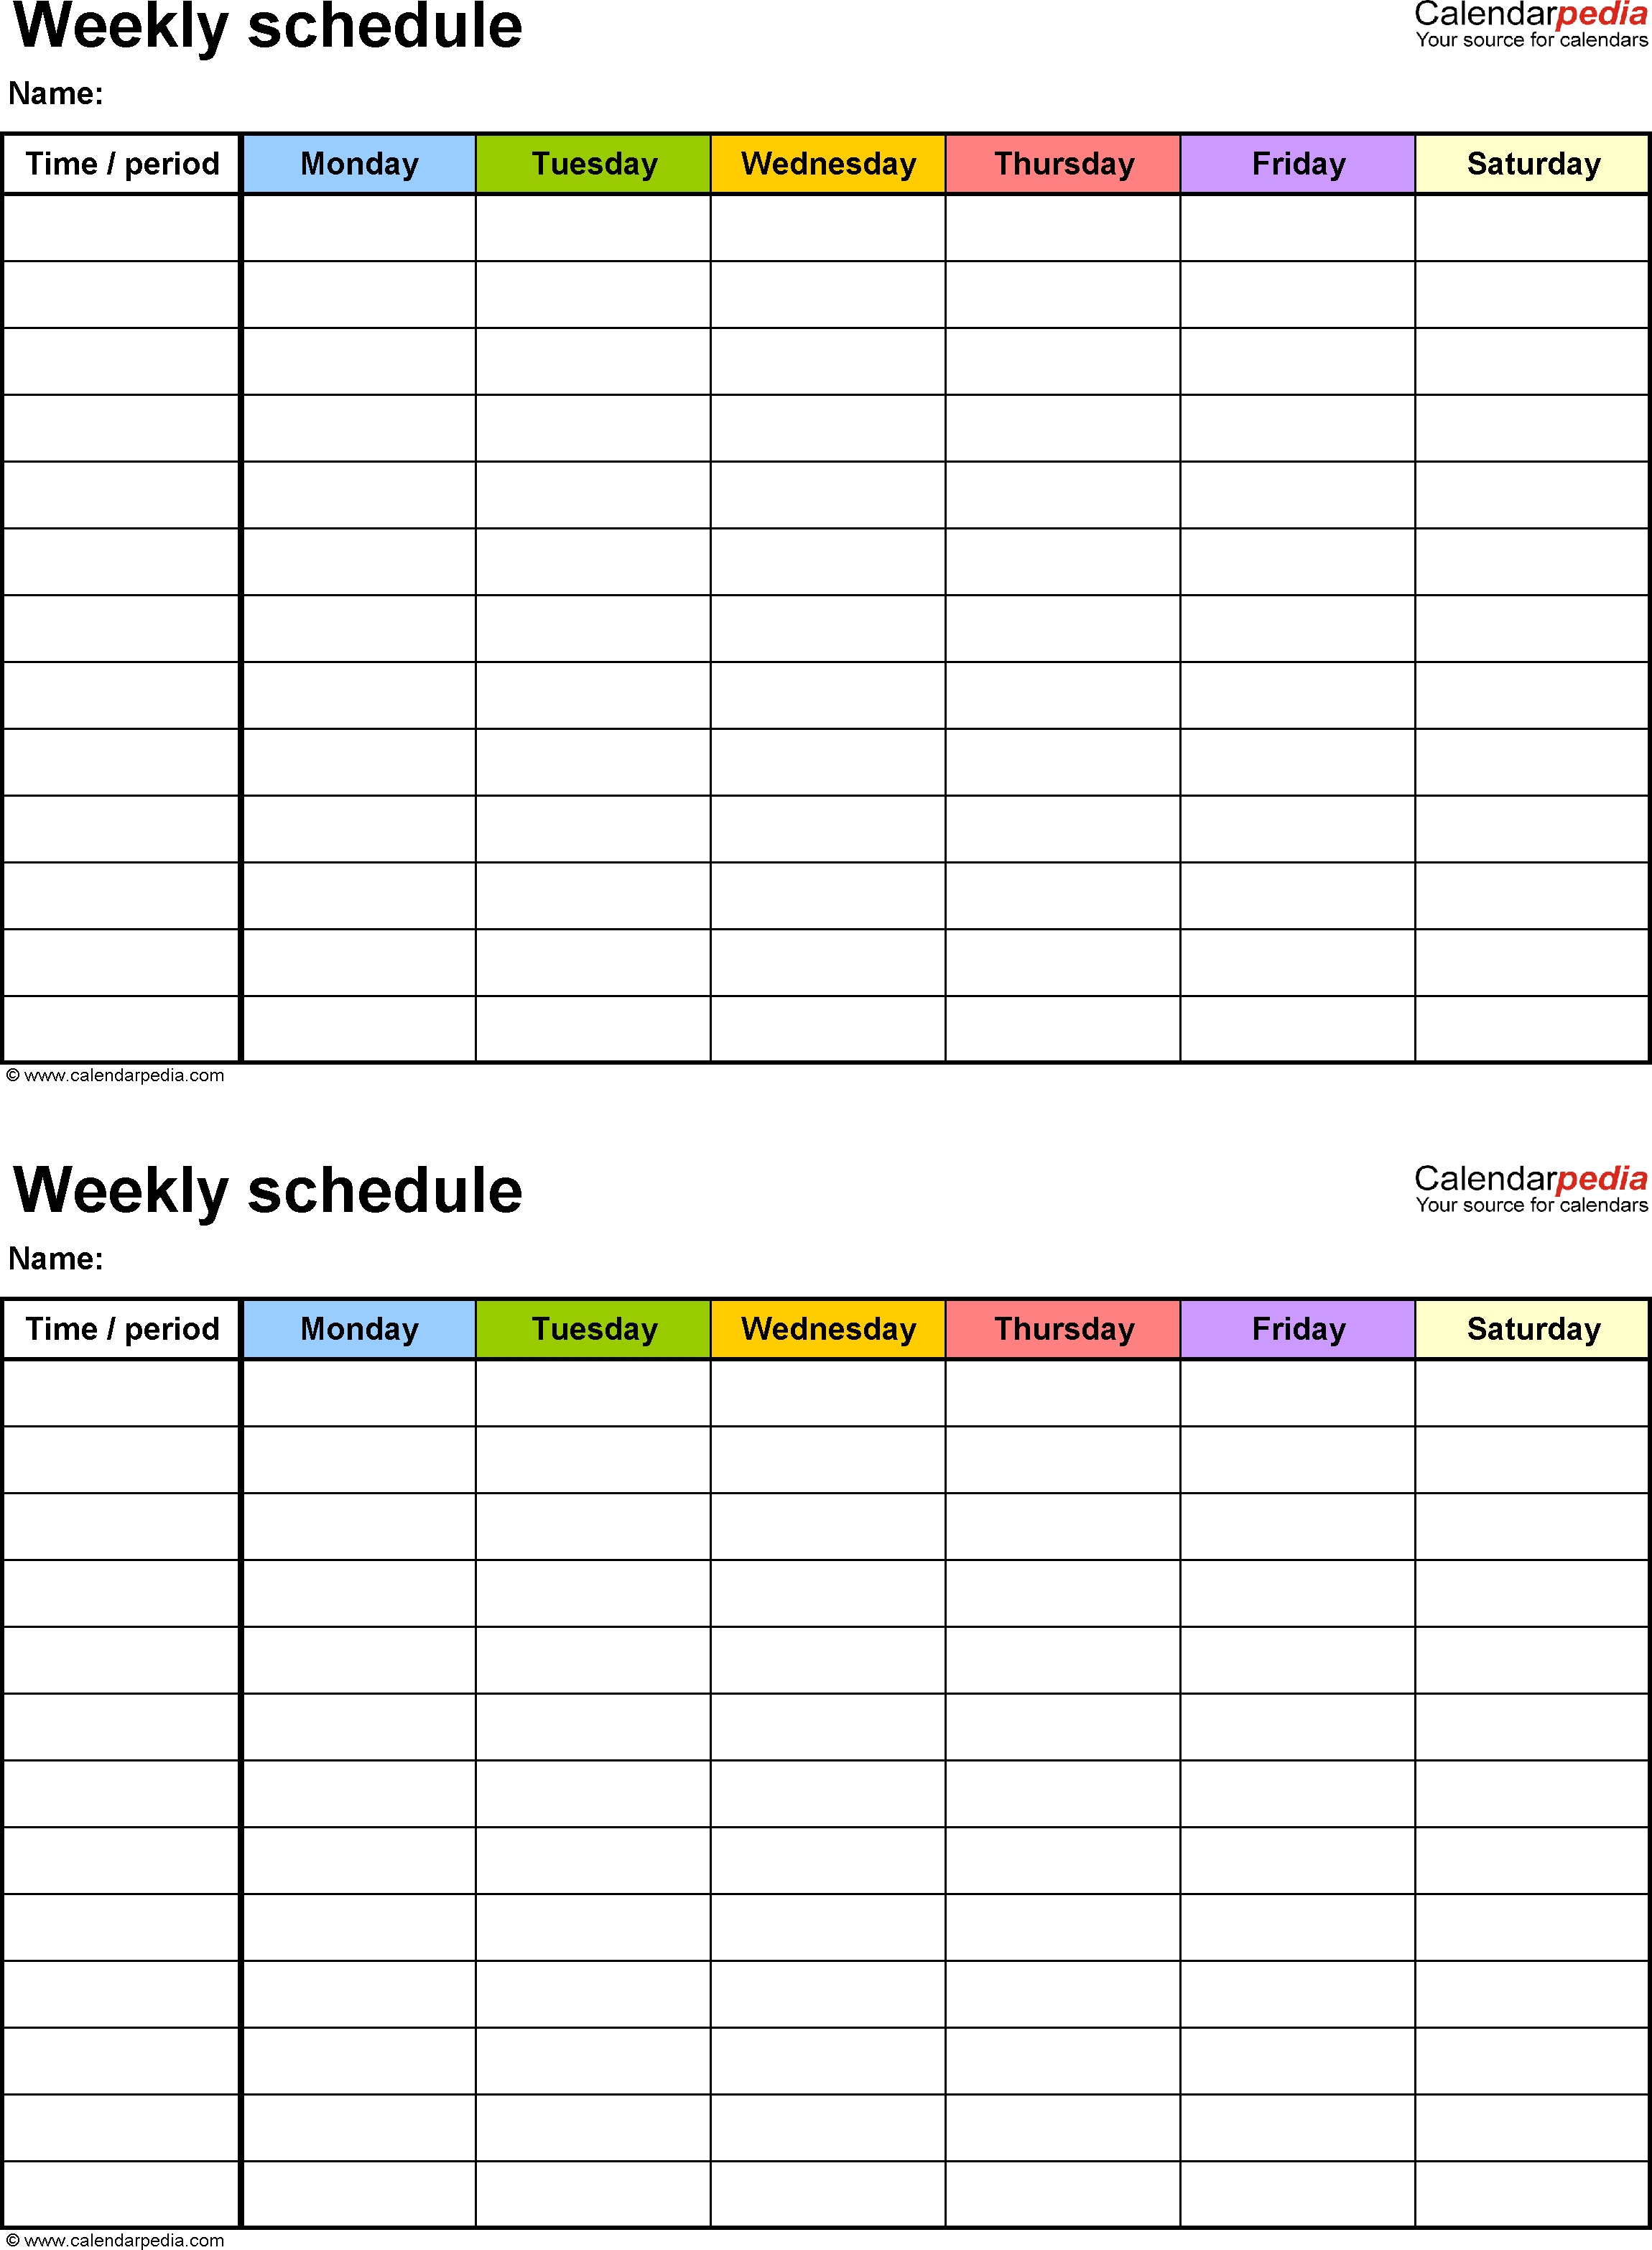 Free Weekly Schedule Templates For Excel - 18 Templates Calendar By Week Template